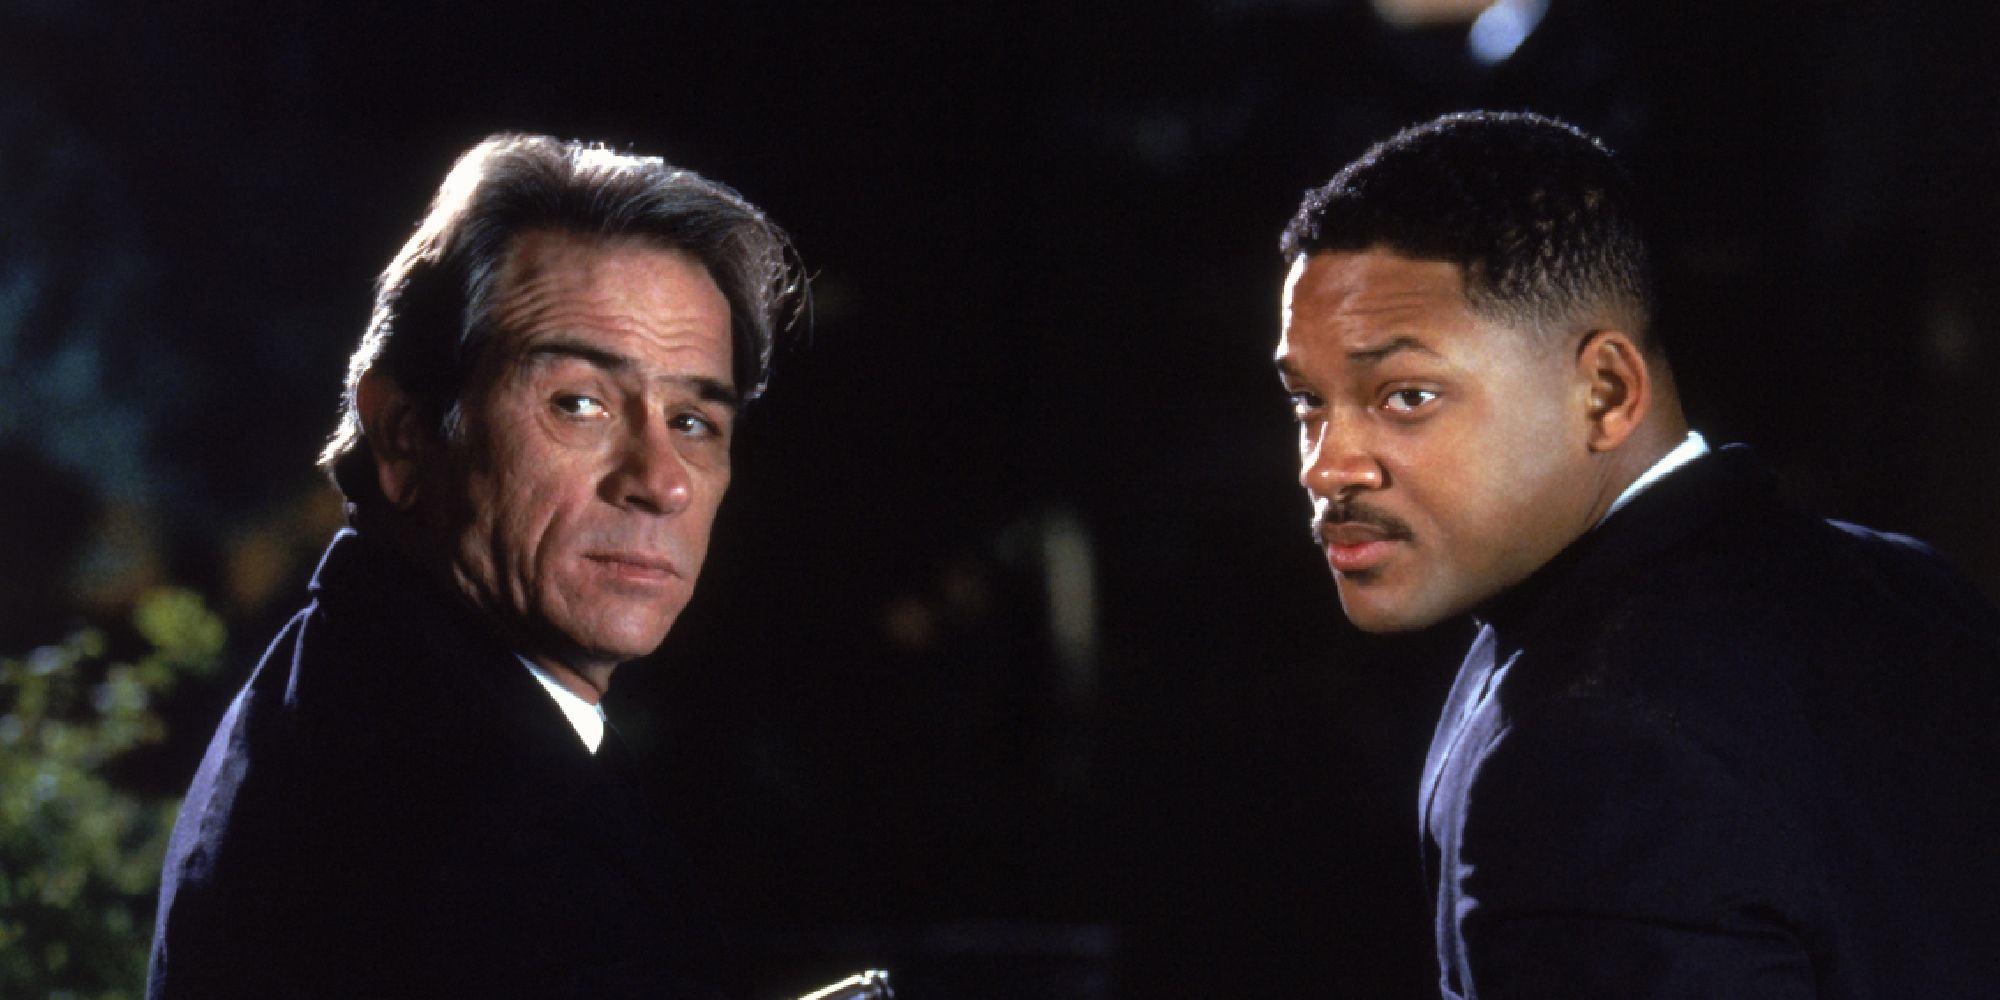 Tommy Lee Jones and Will Smith in MIB